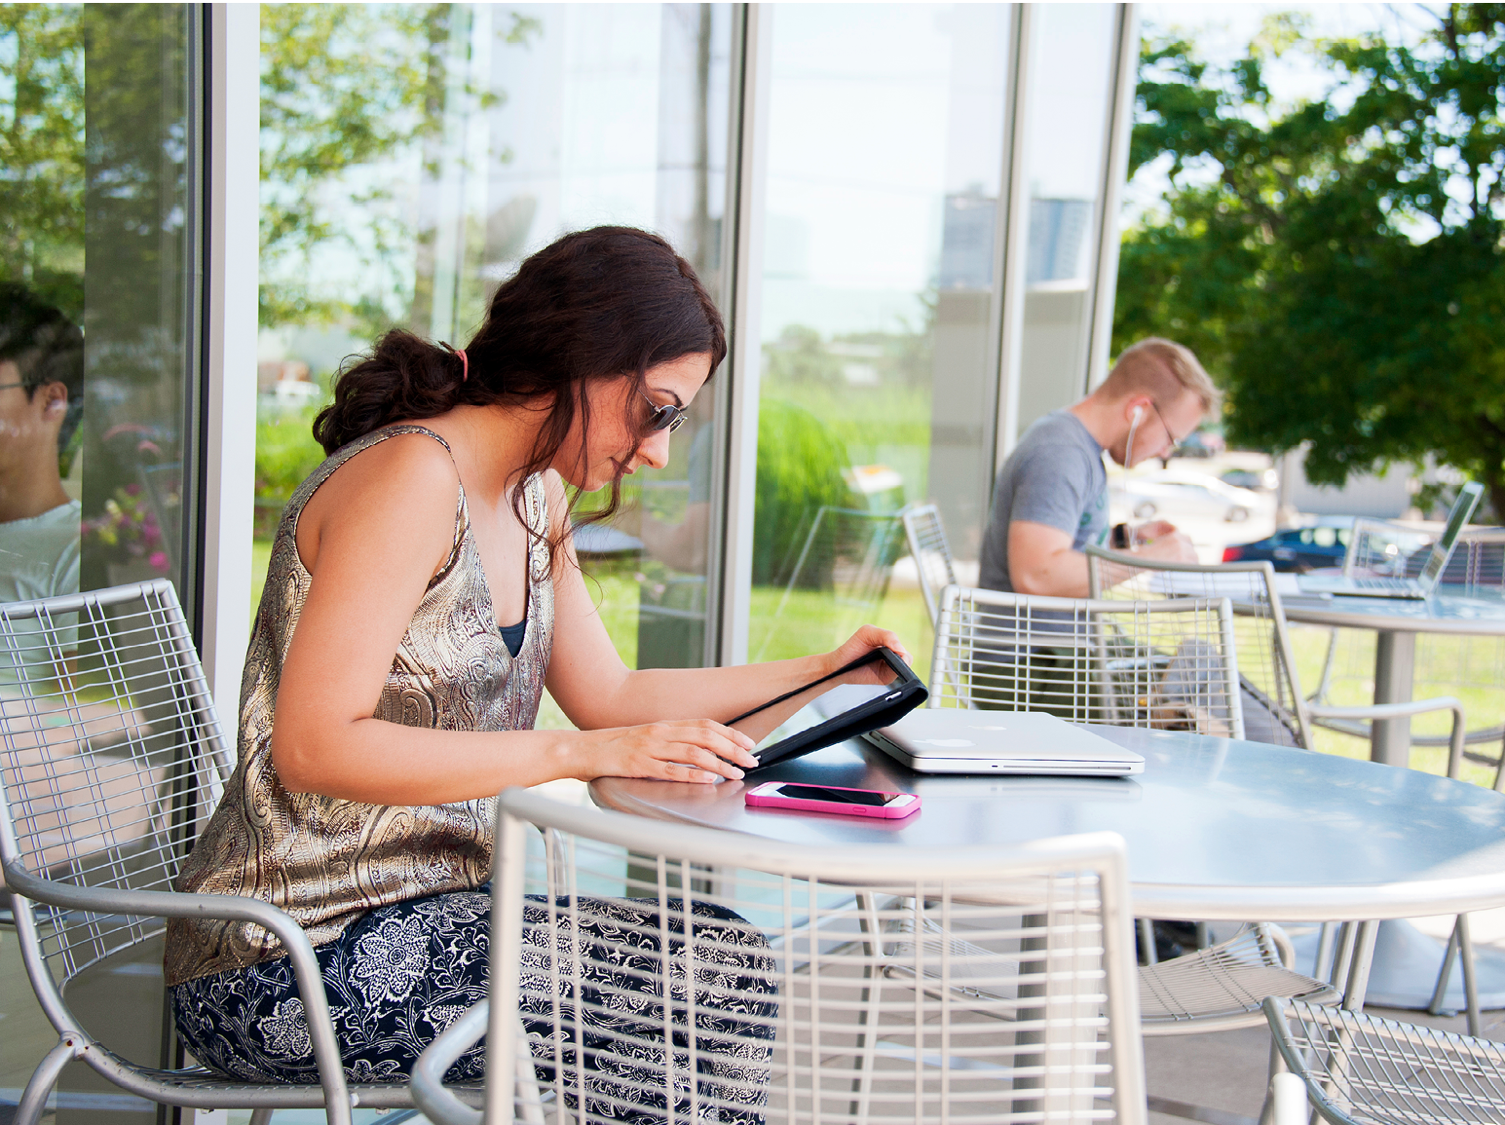 woman seated at patio table using tablet, at the library